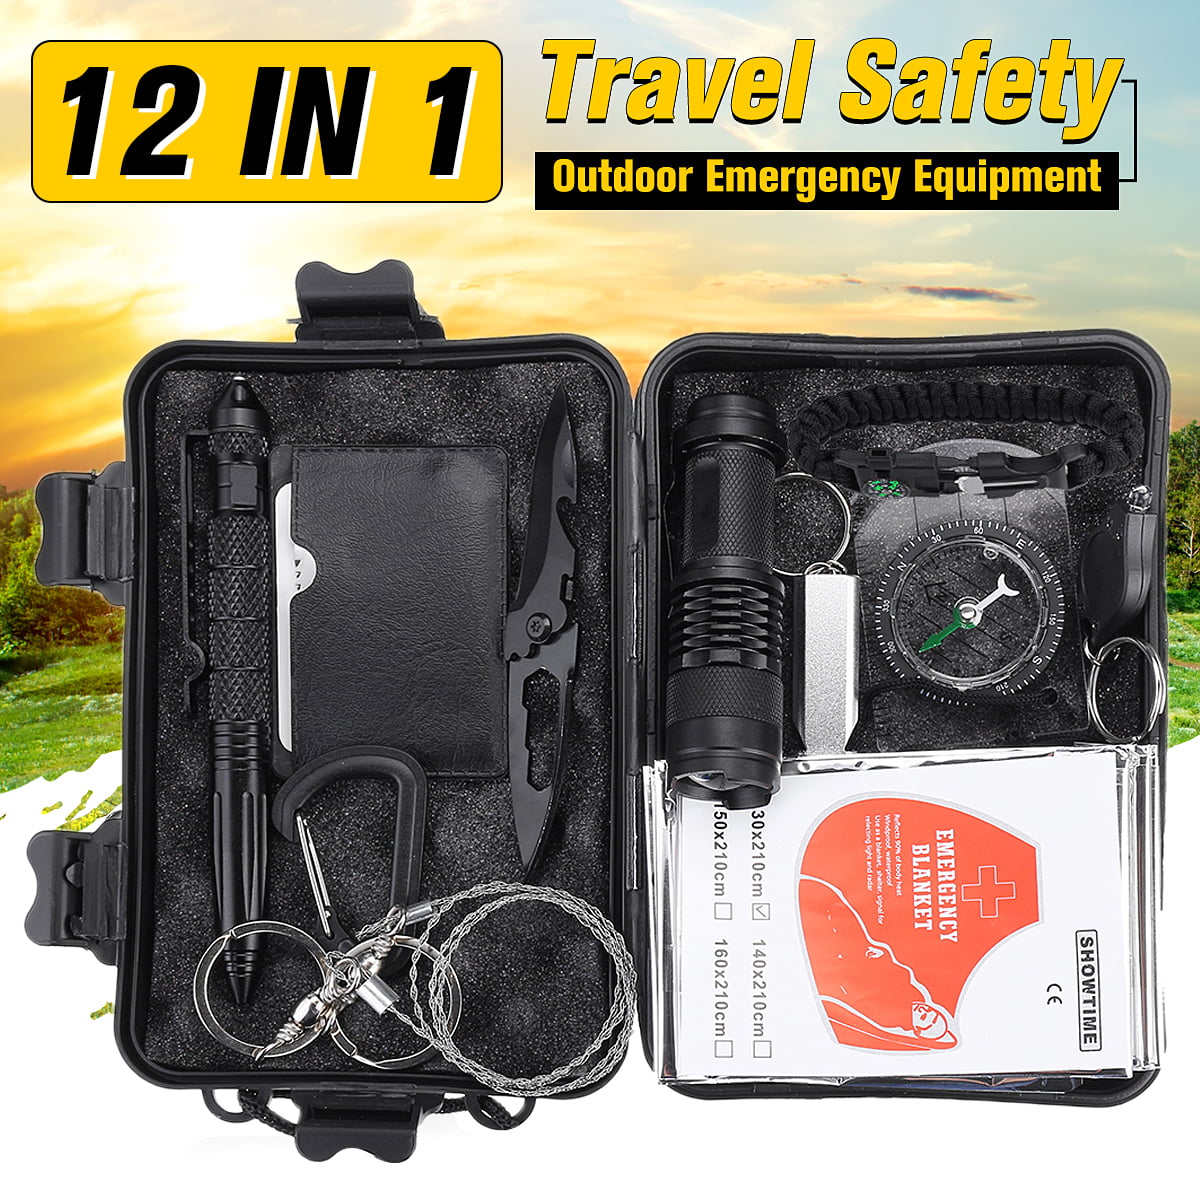 3 Piece Set of Waterproof Document Holder Pouch Boat Camping Emergency Hiking 